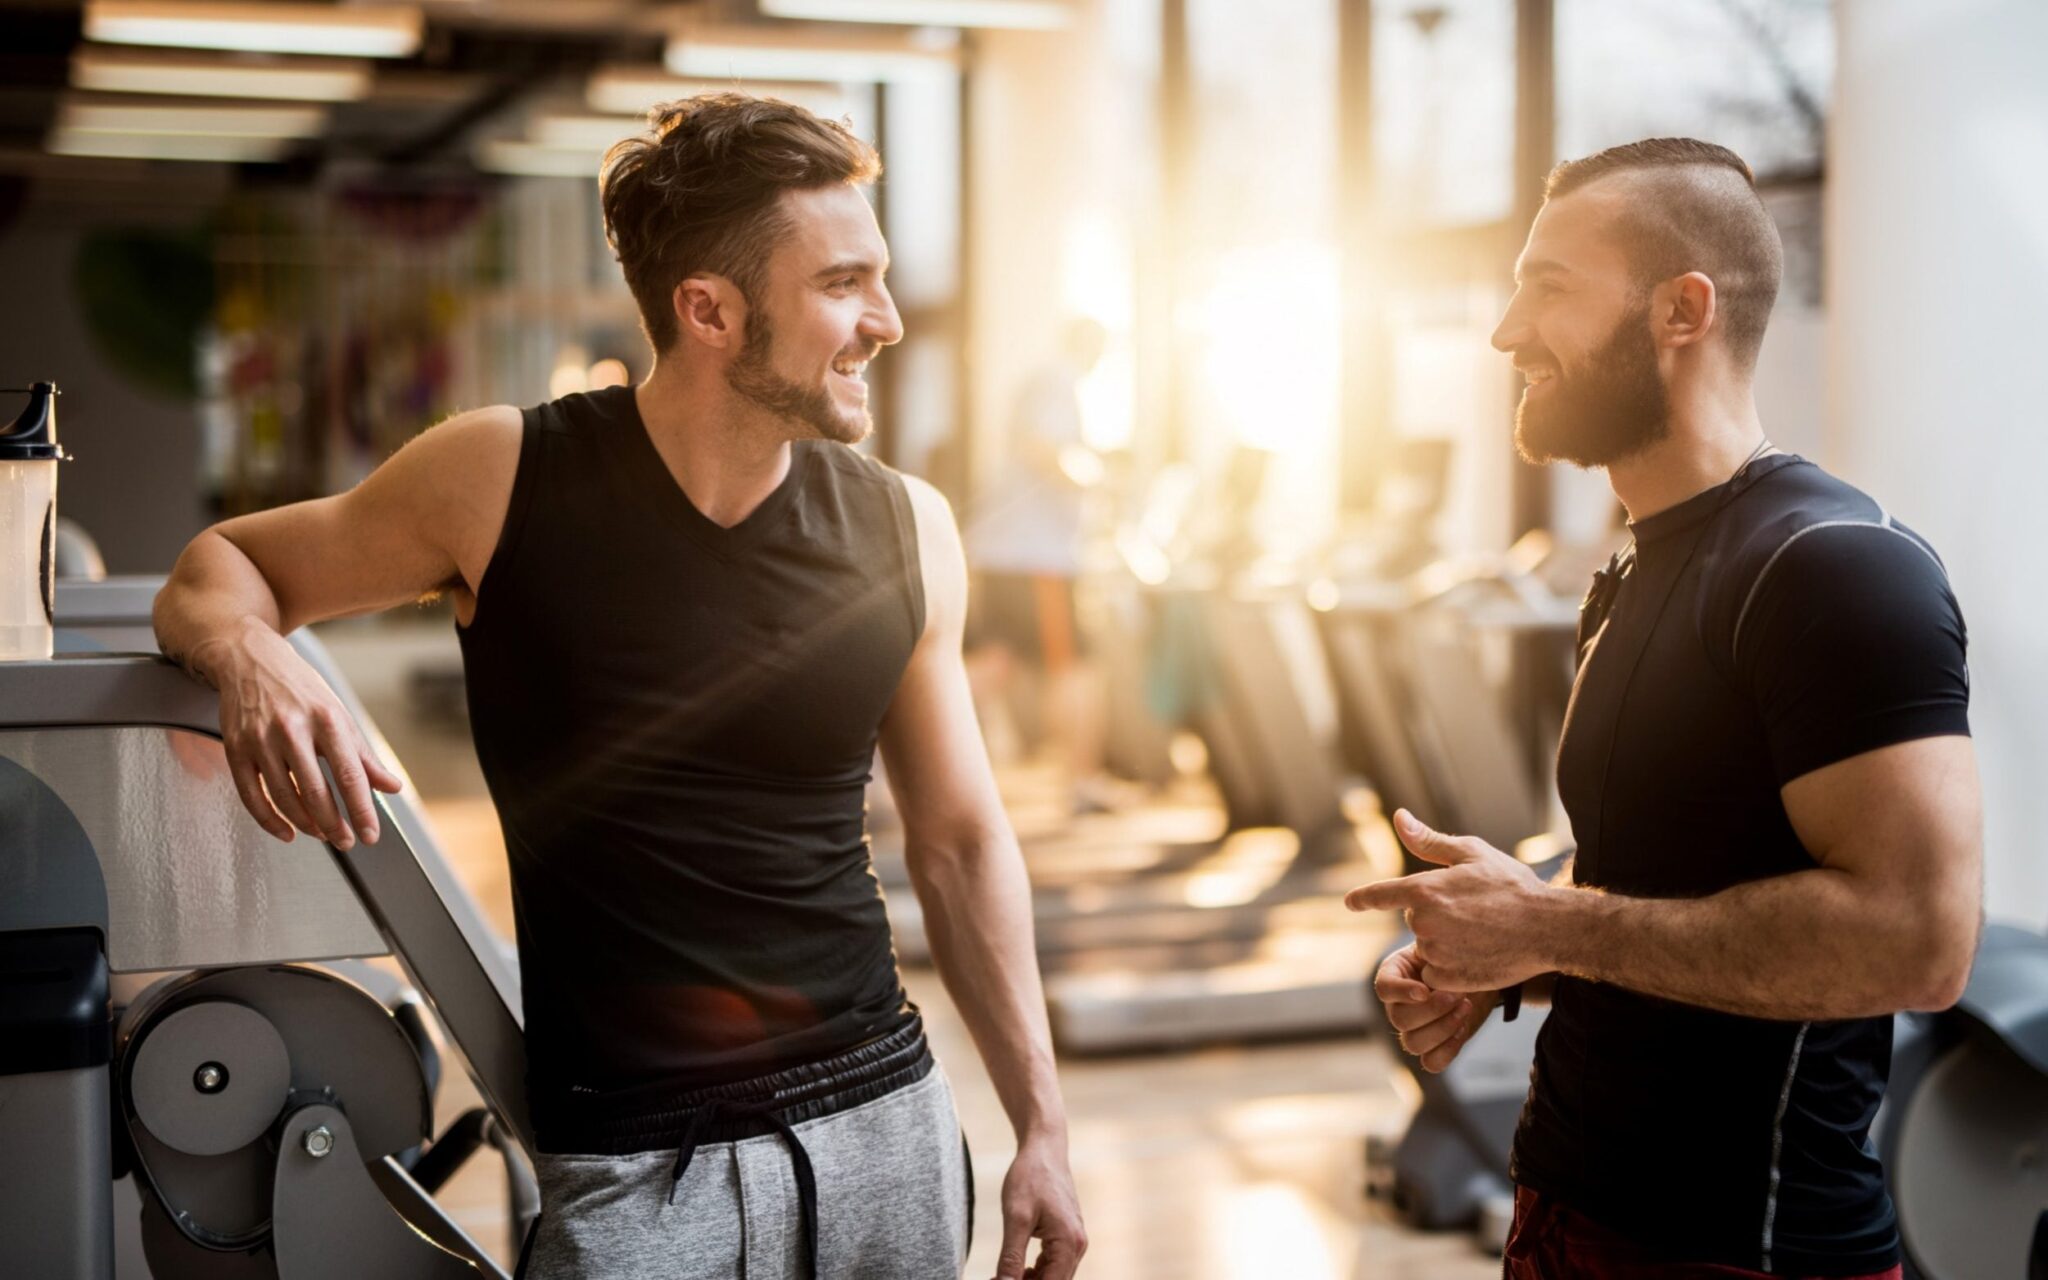 Gym Etiquette Tips For Men And Women: Don't Be A Troublemaker!